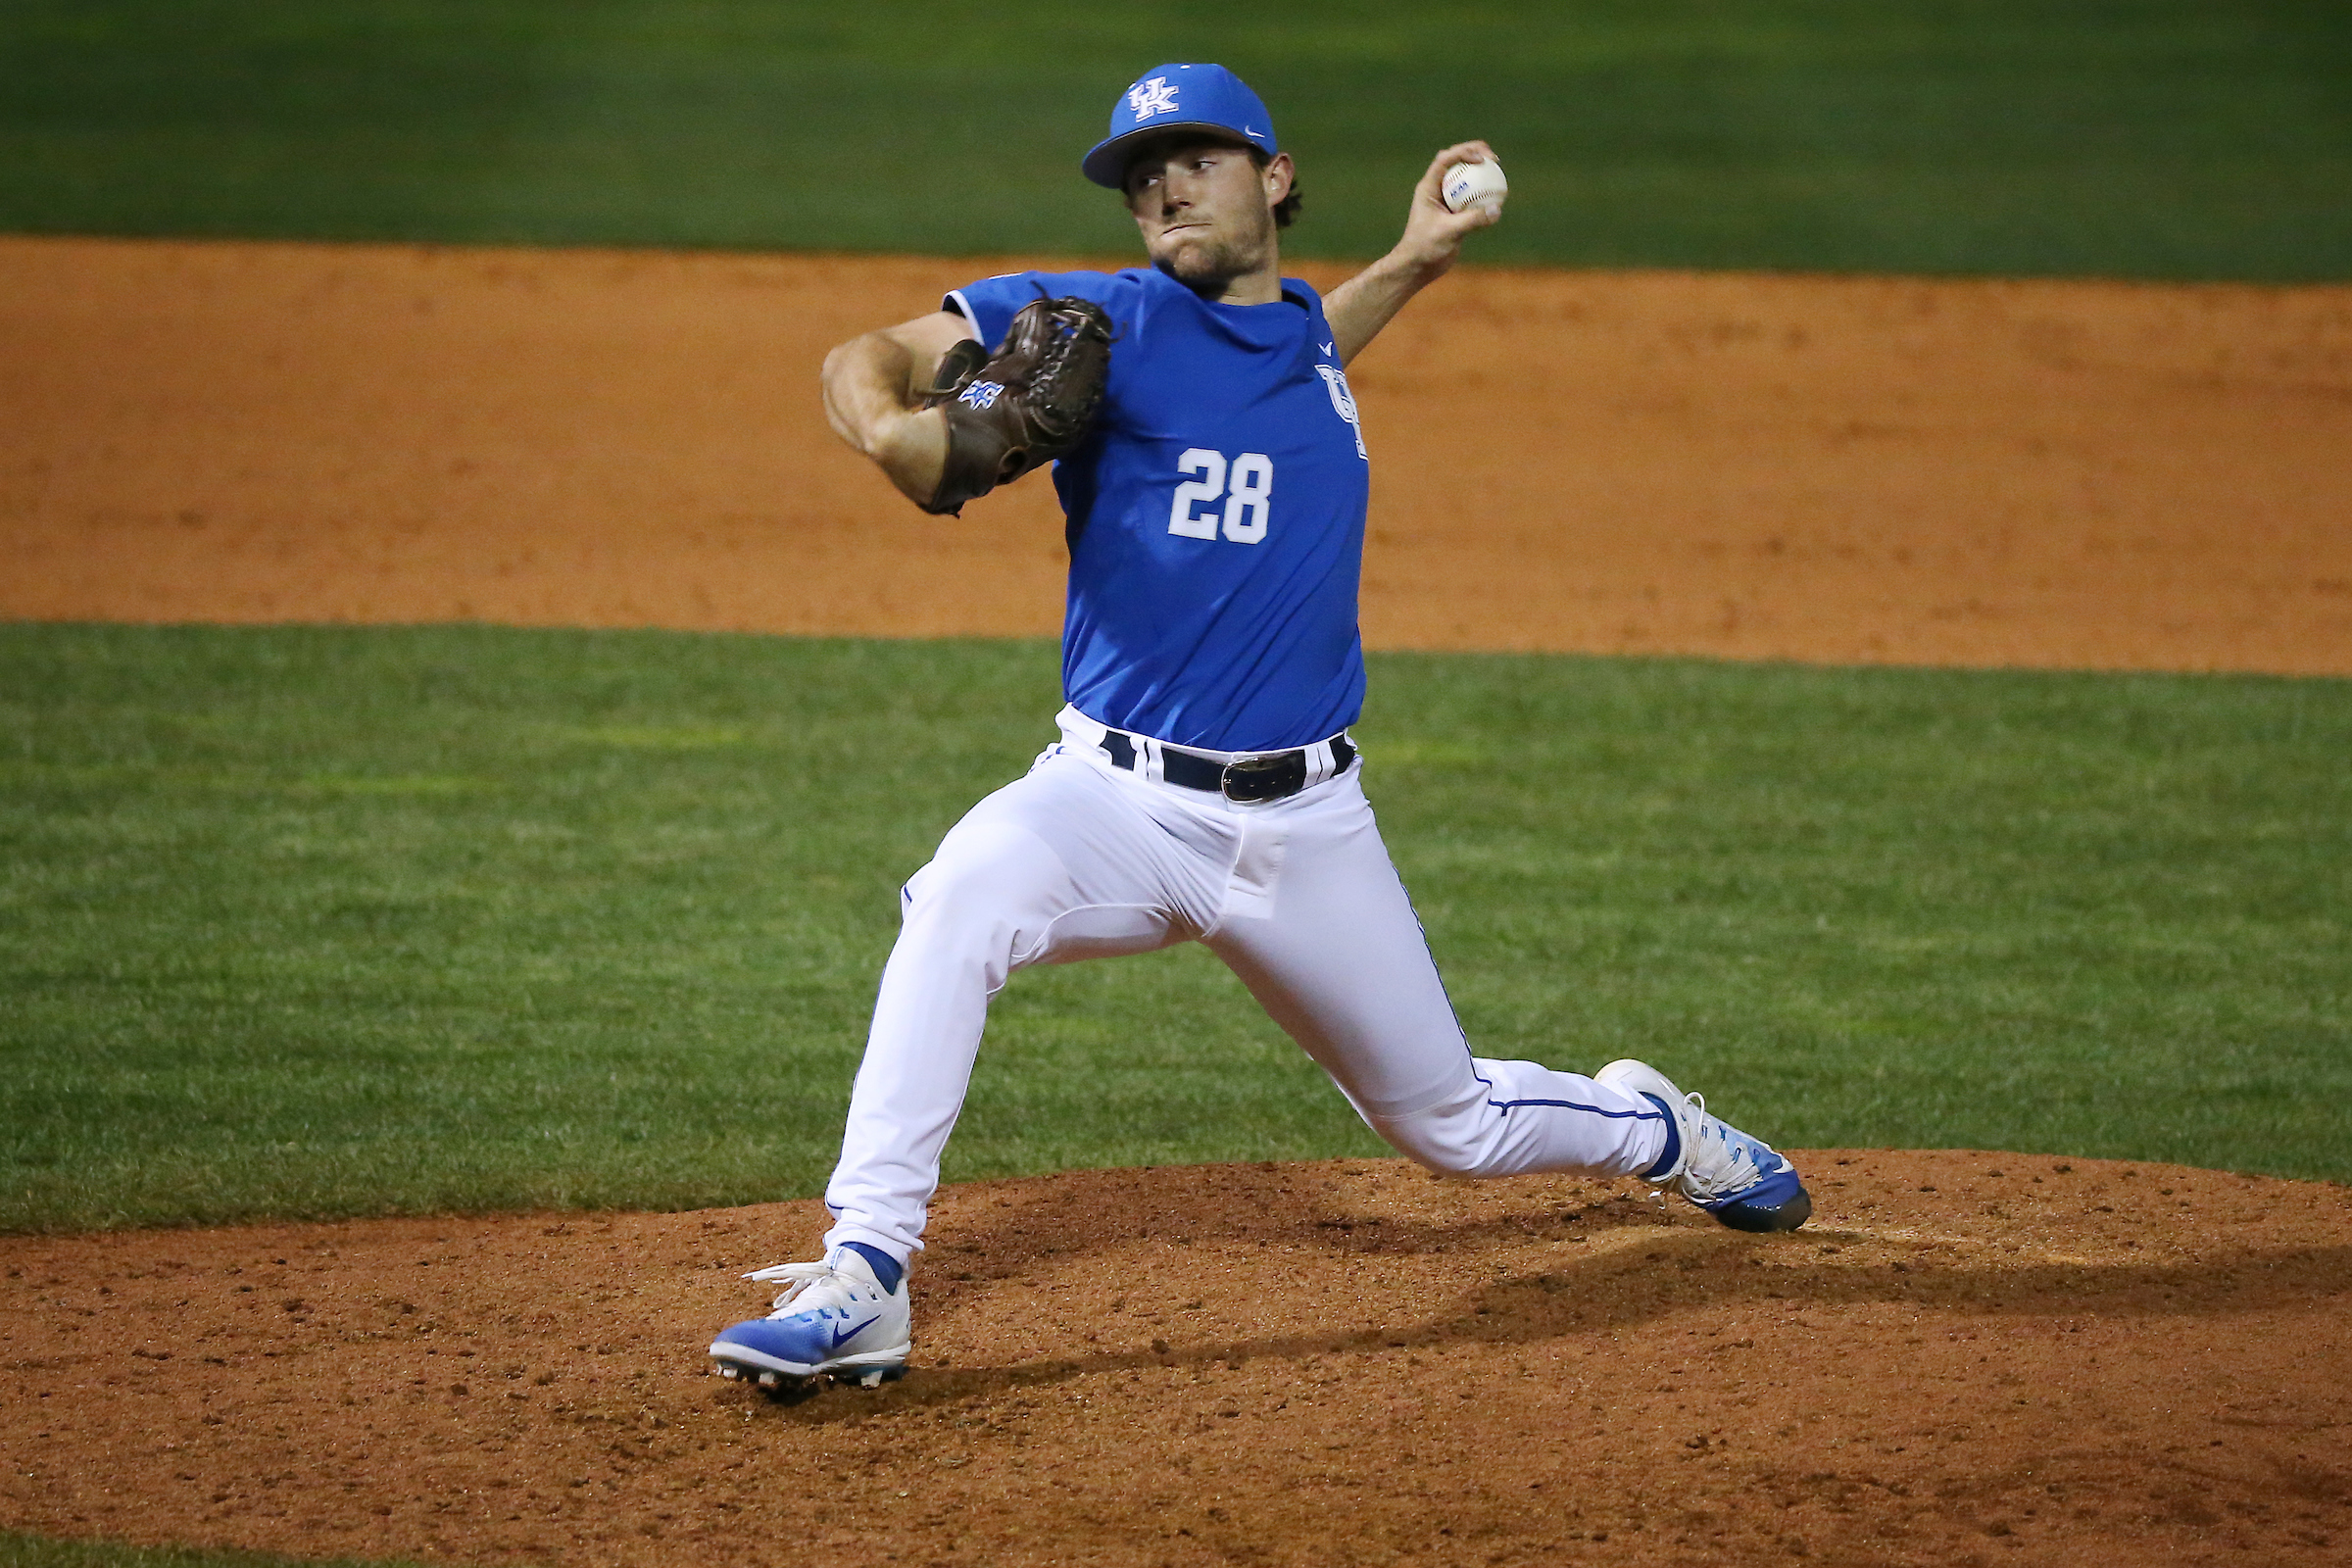 Kentucky Outlasts Texas A&M to Win Thriller in Ninth Inning, Take Series